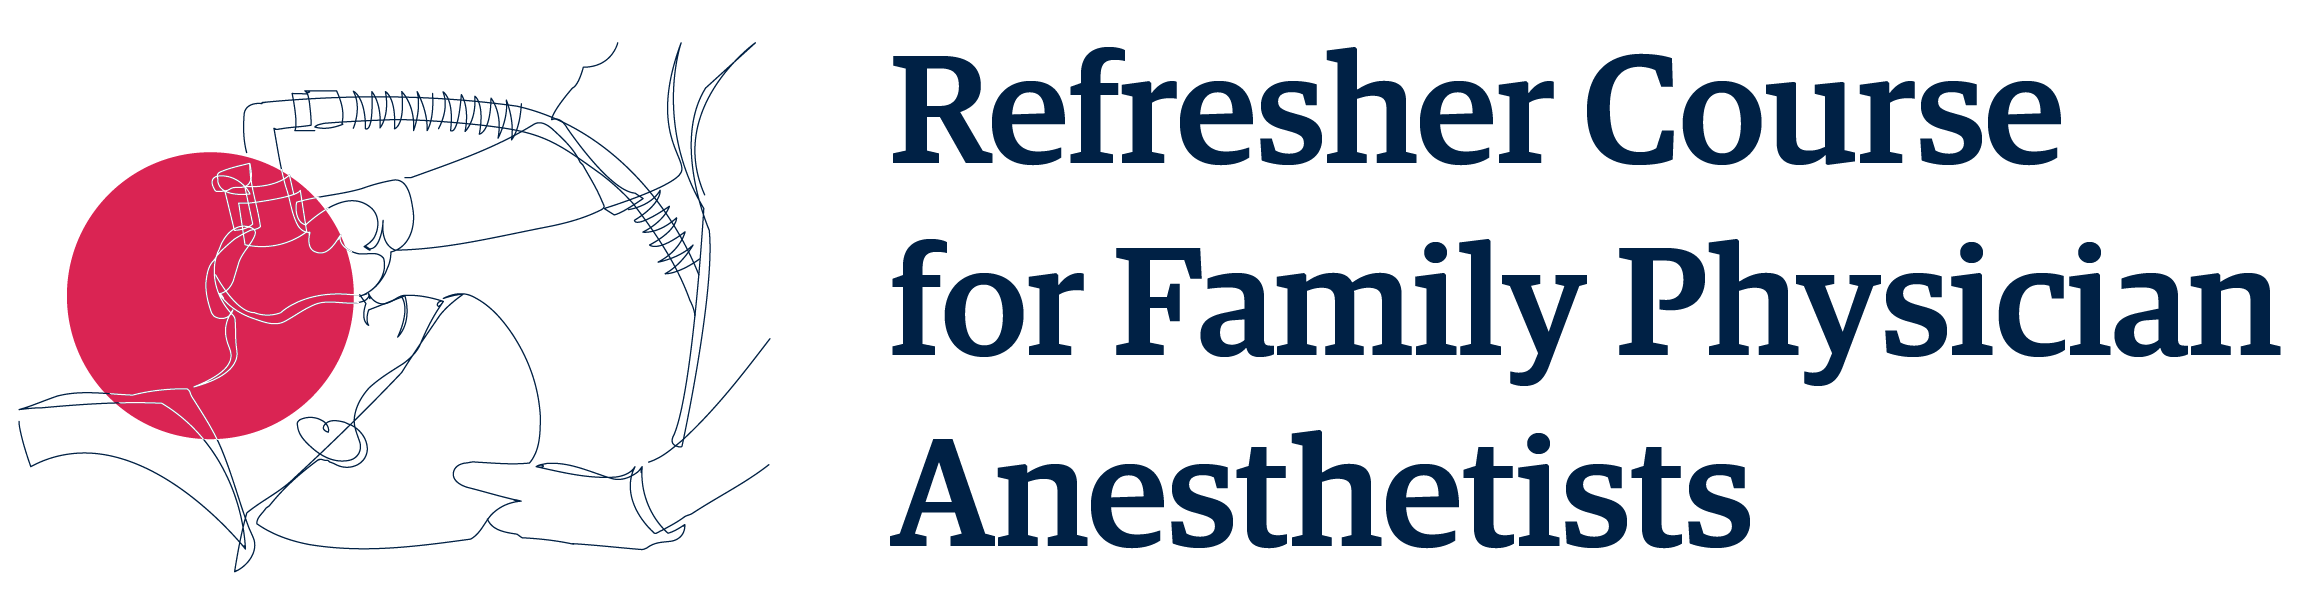 Course Image Refresher Course for Family Physician Anesthetists 2022